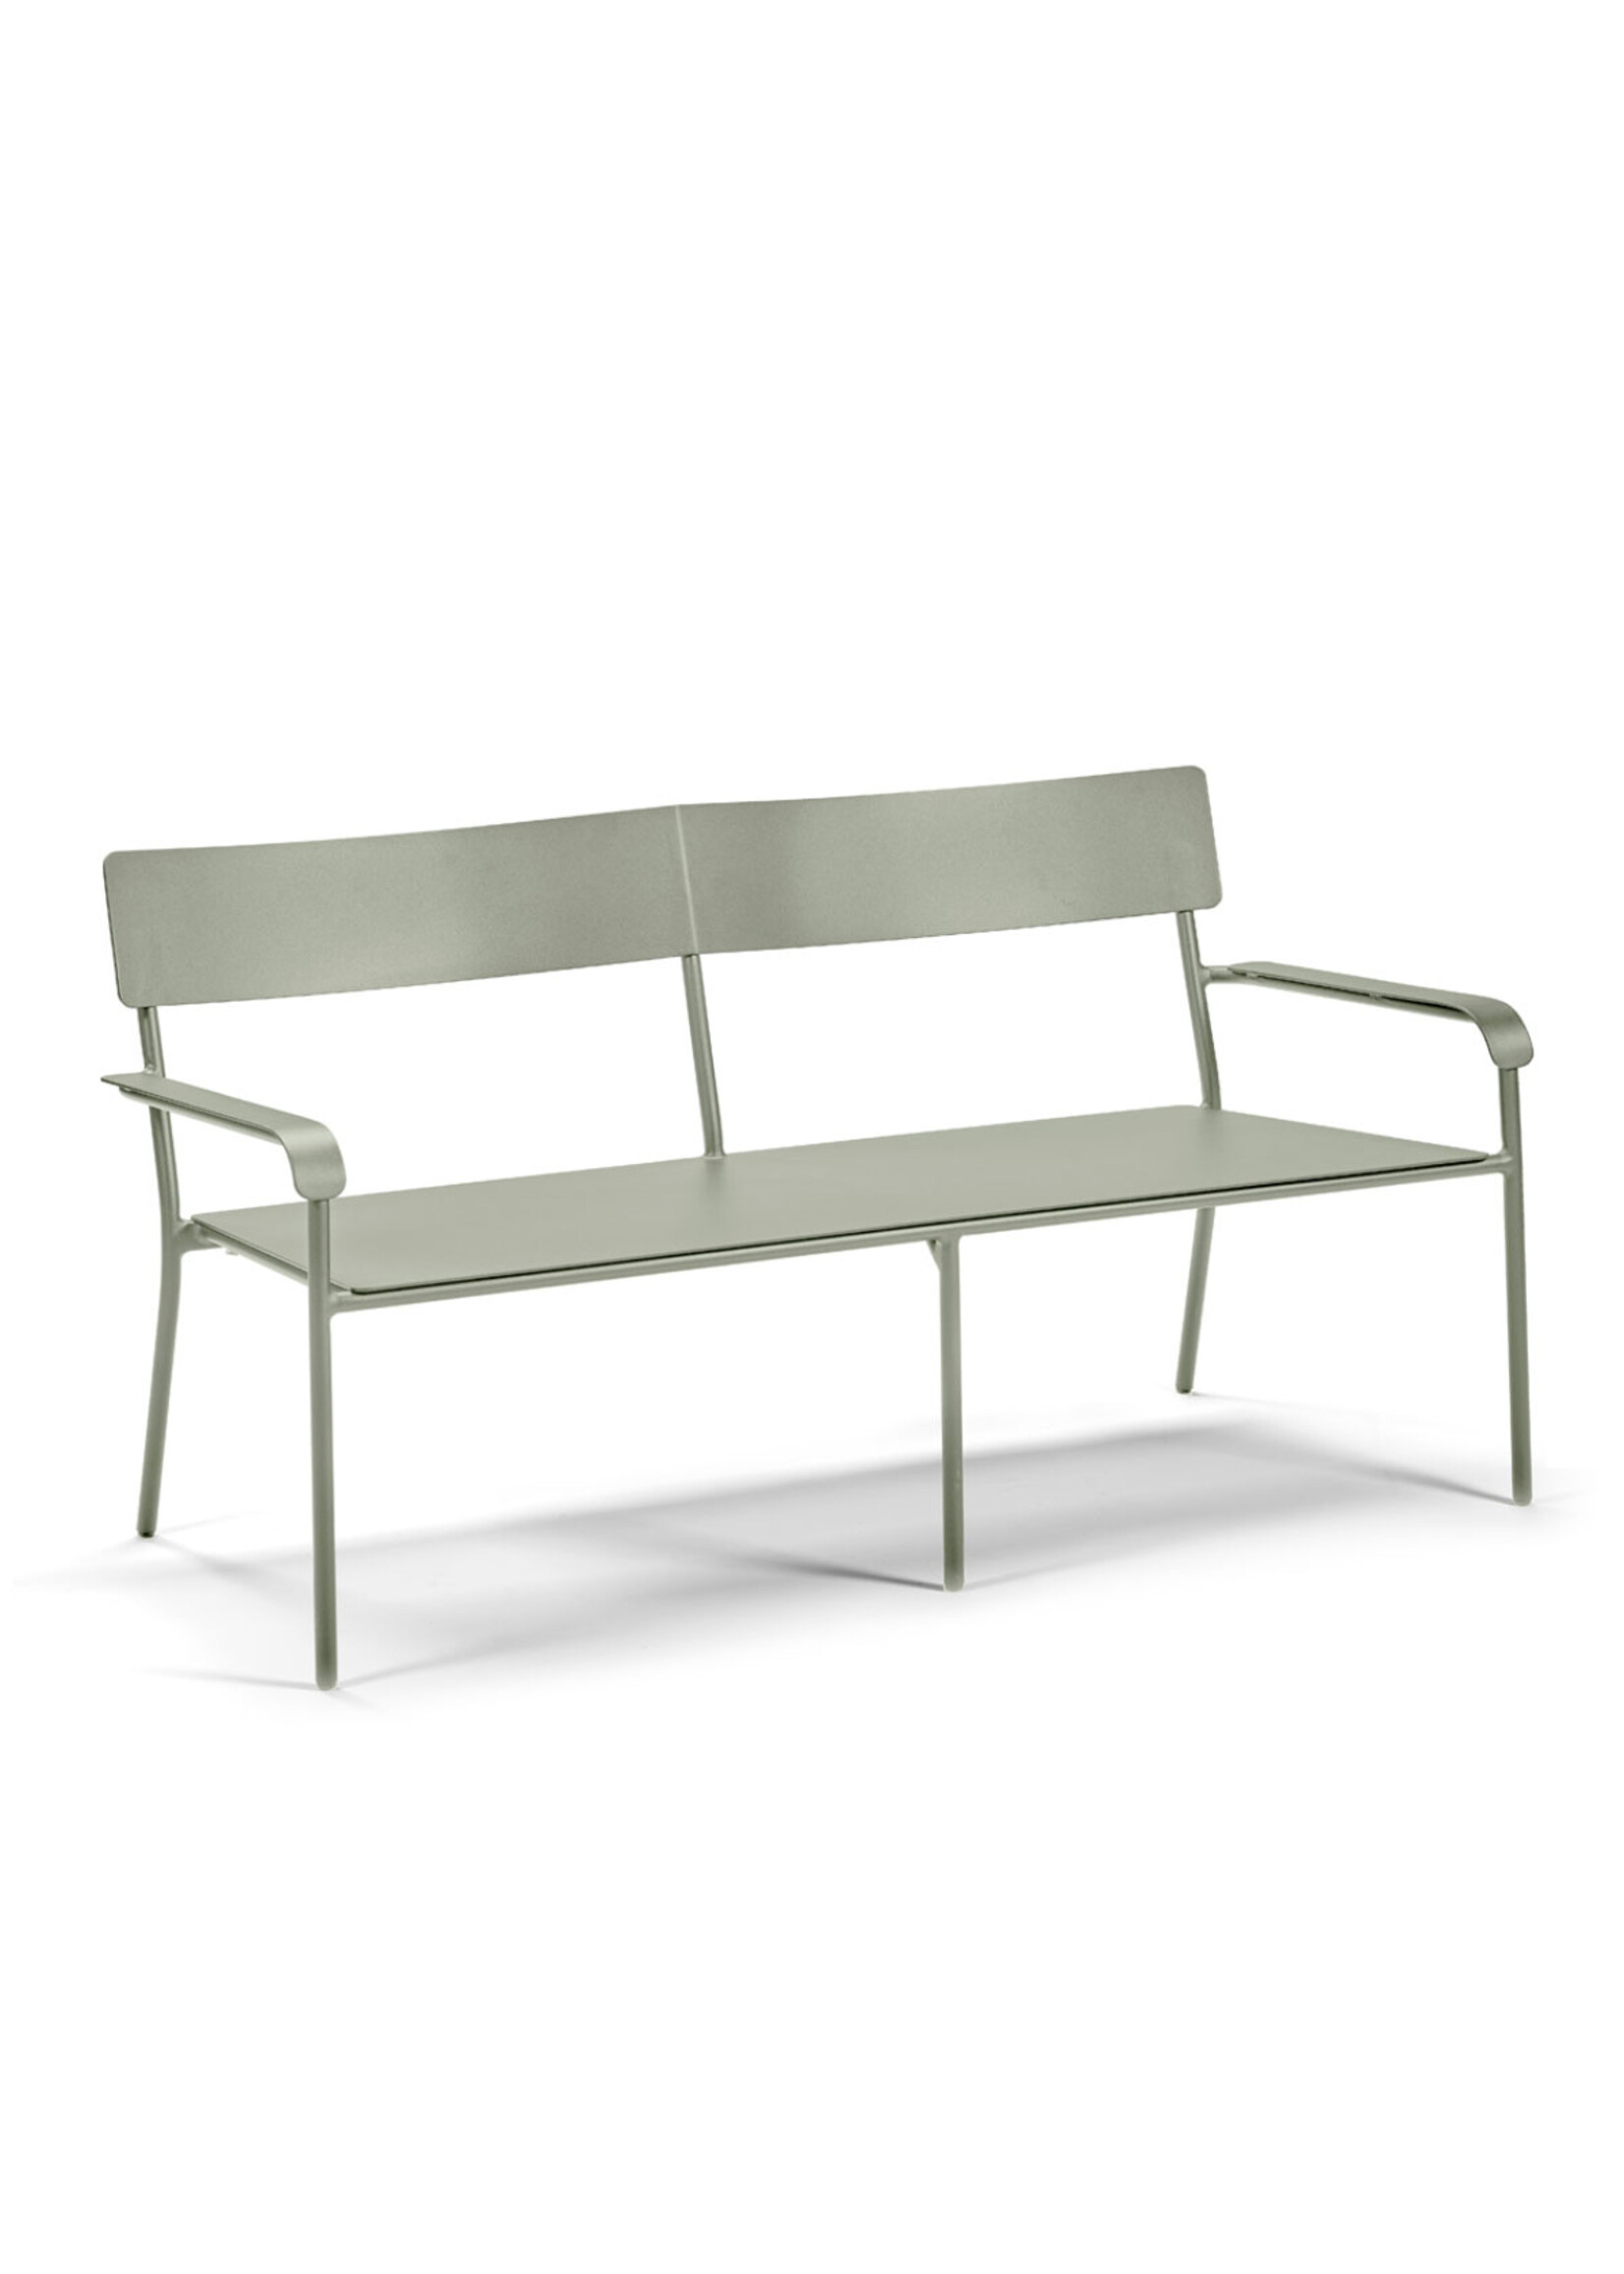 Serax August - Outdoor - Lounge Chair Two-Seat - Eucalyptus Green